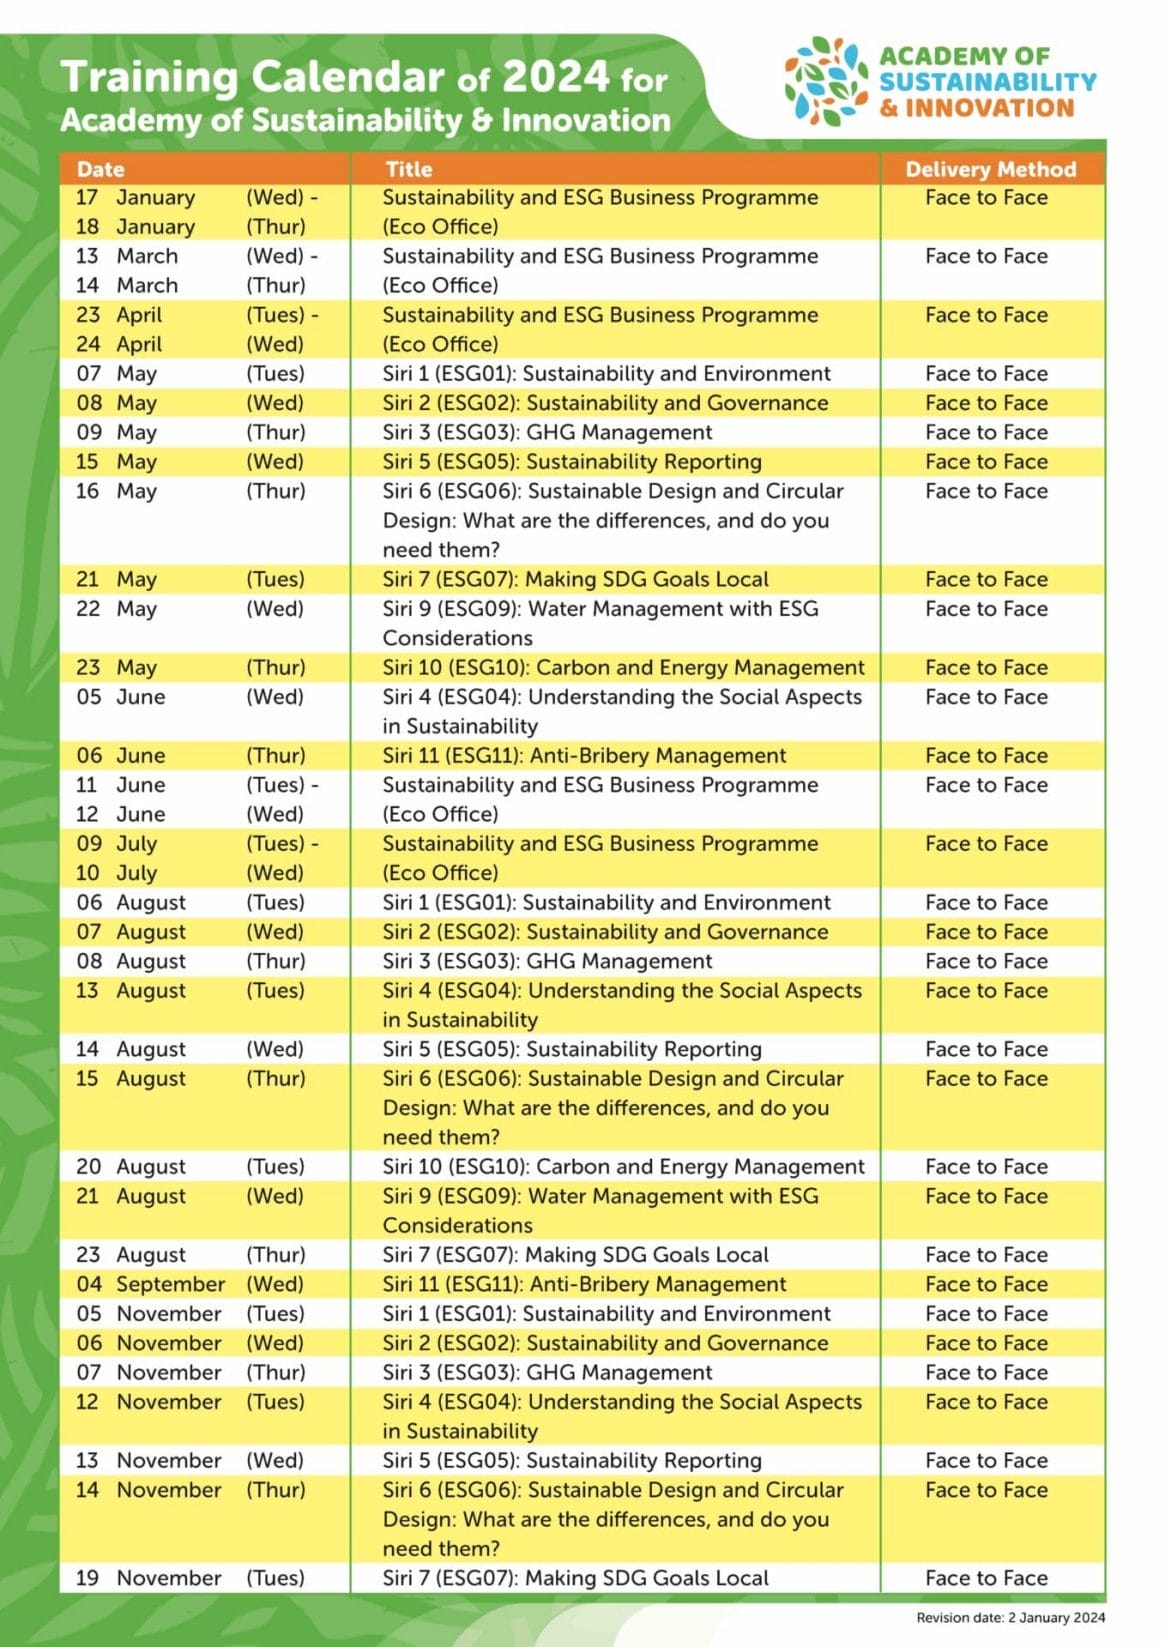 Training Calendar of 2024 for Academy of Sustainability & Innovation_Page_1